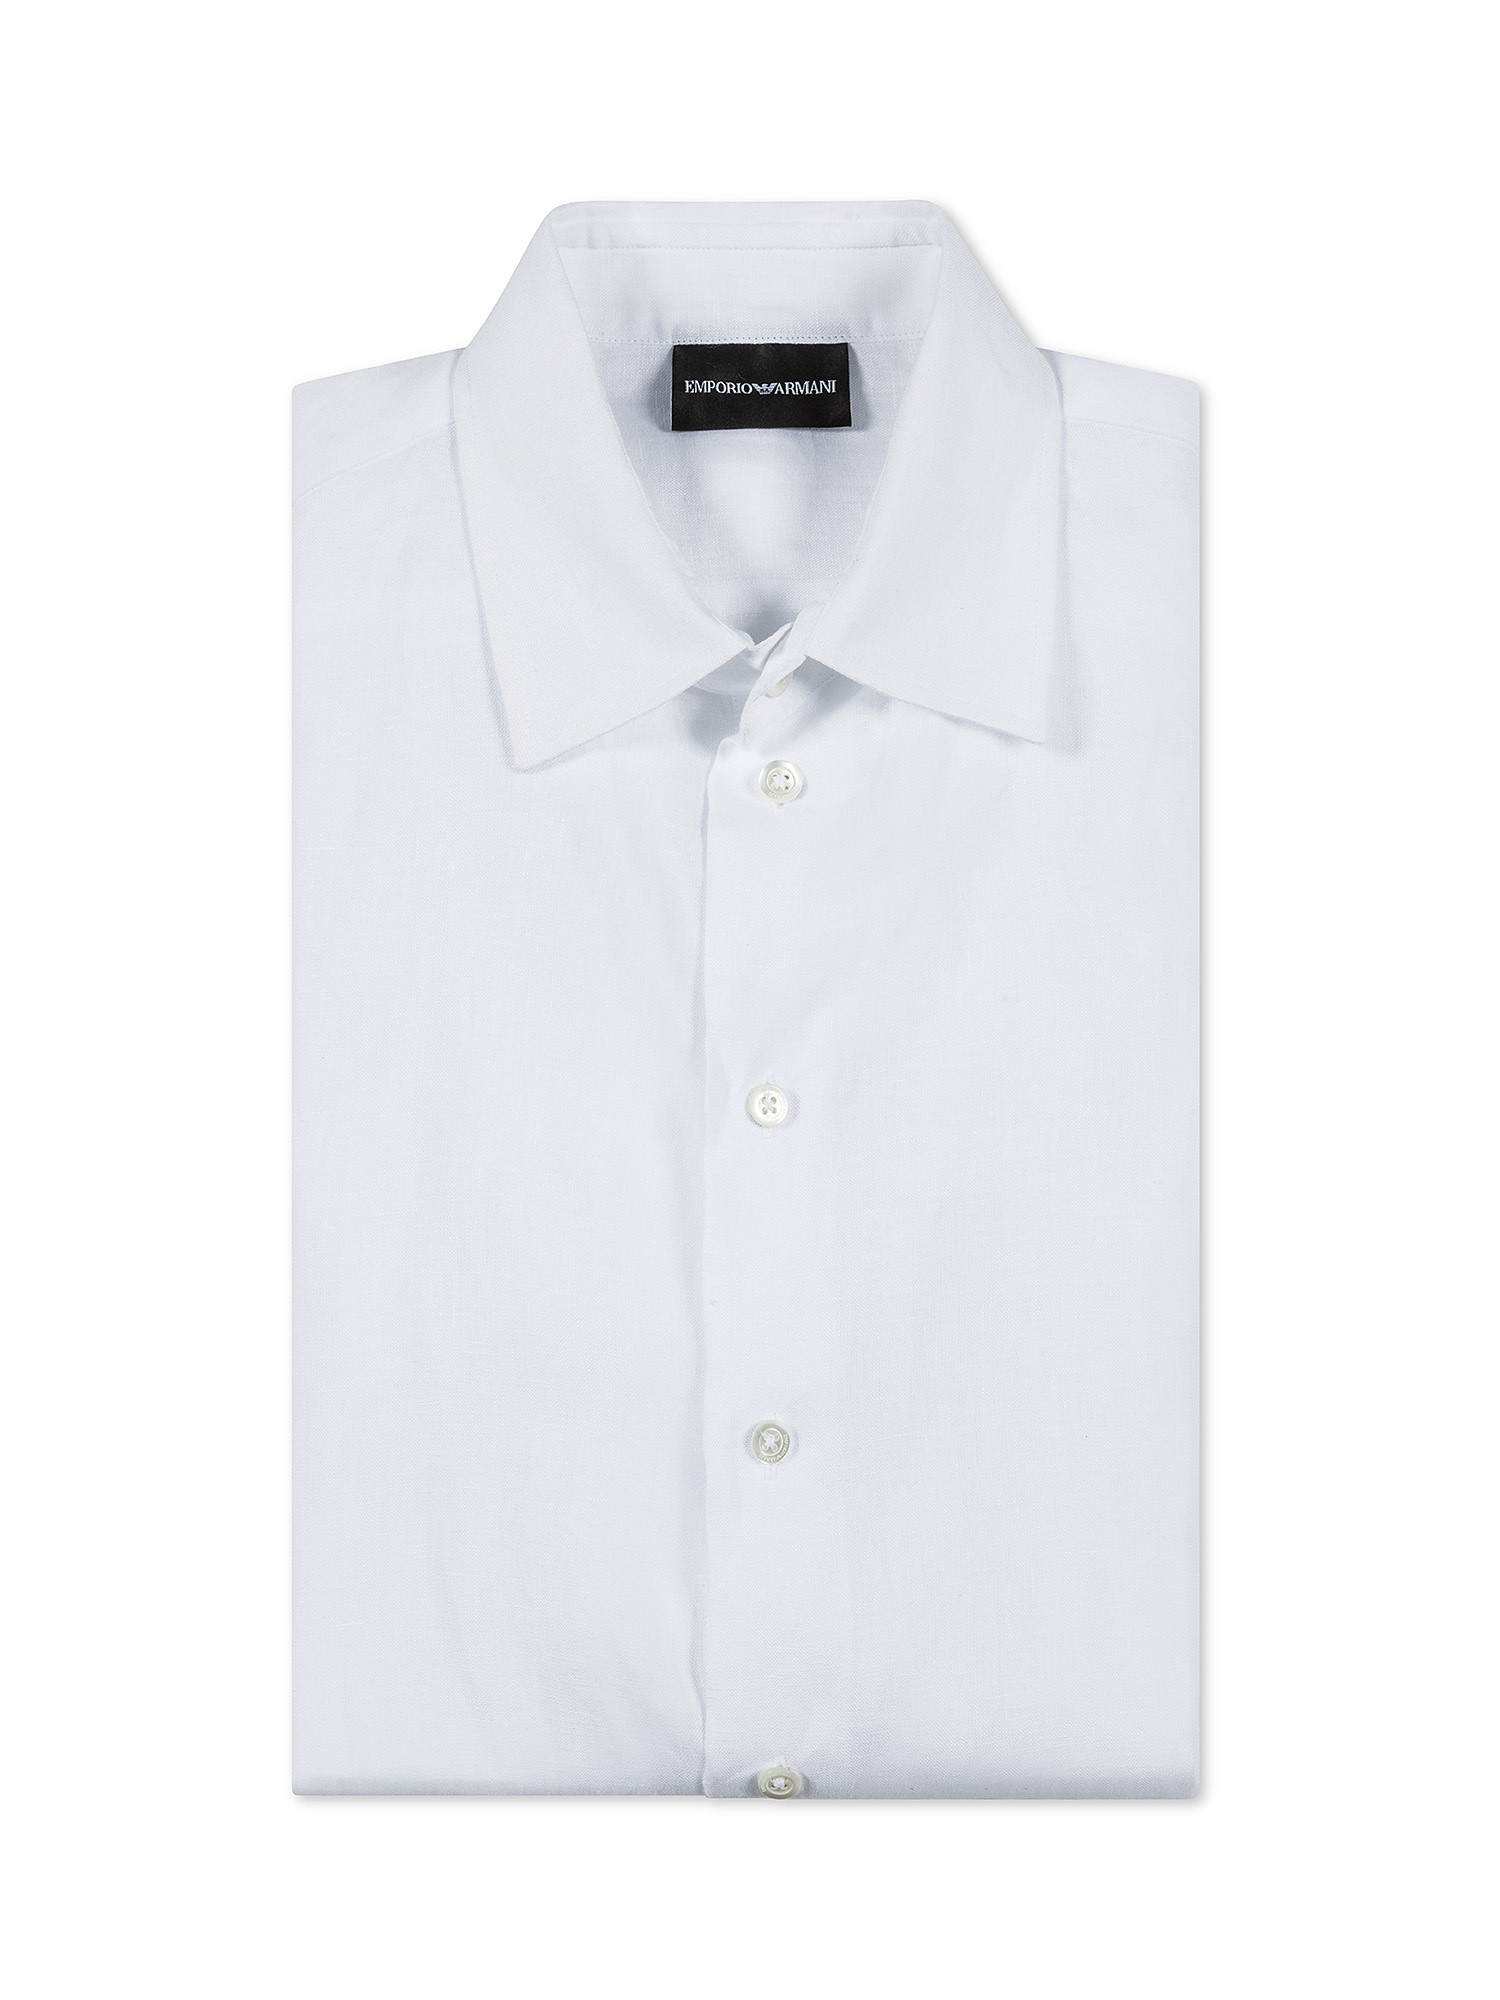 Emporio Armani - Camicia relaxed fit in puro lino, Bianco, large image number 0